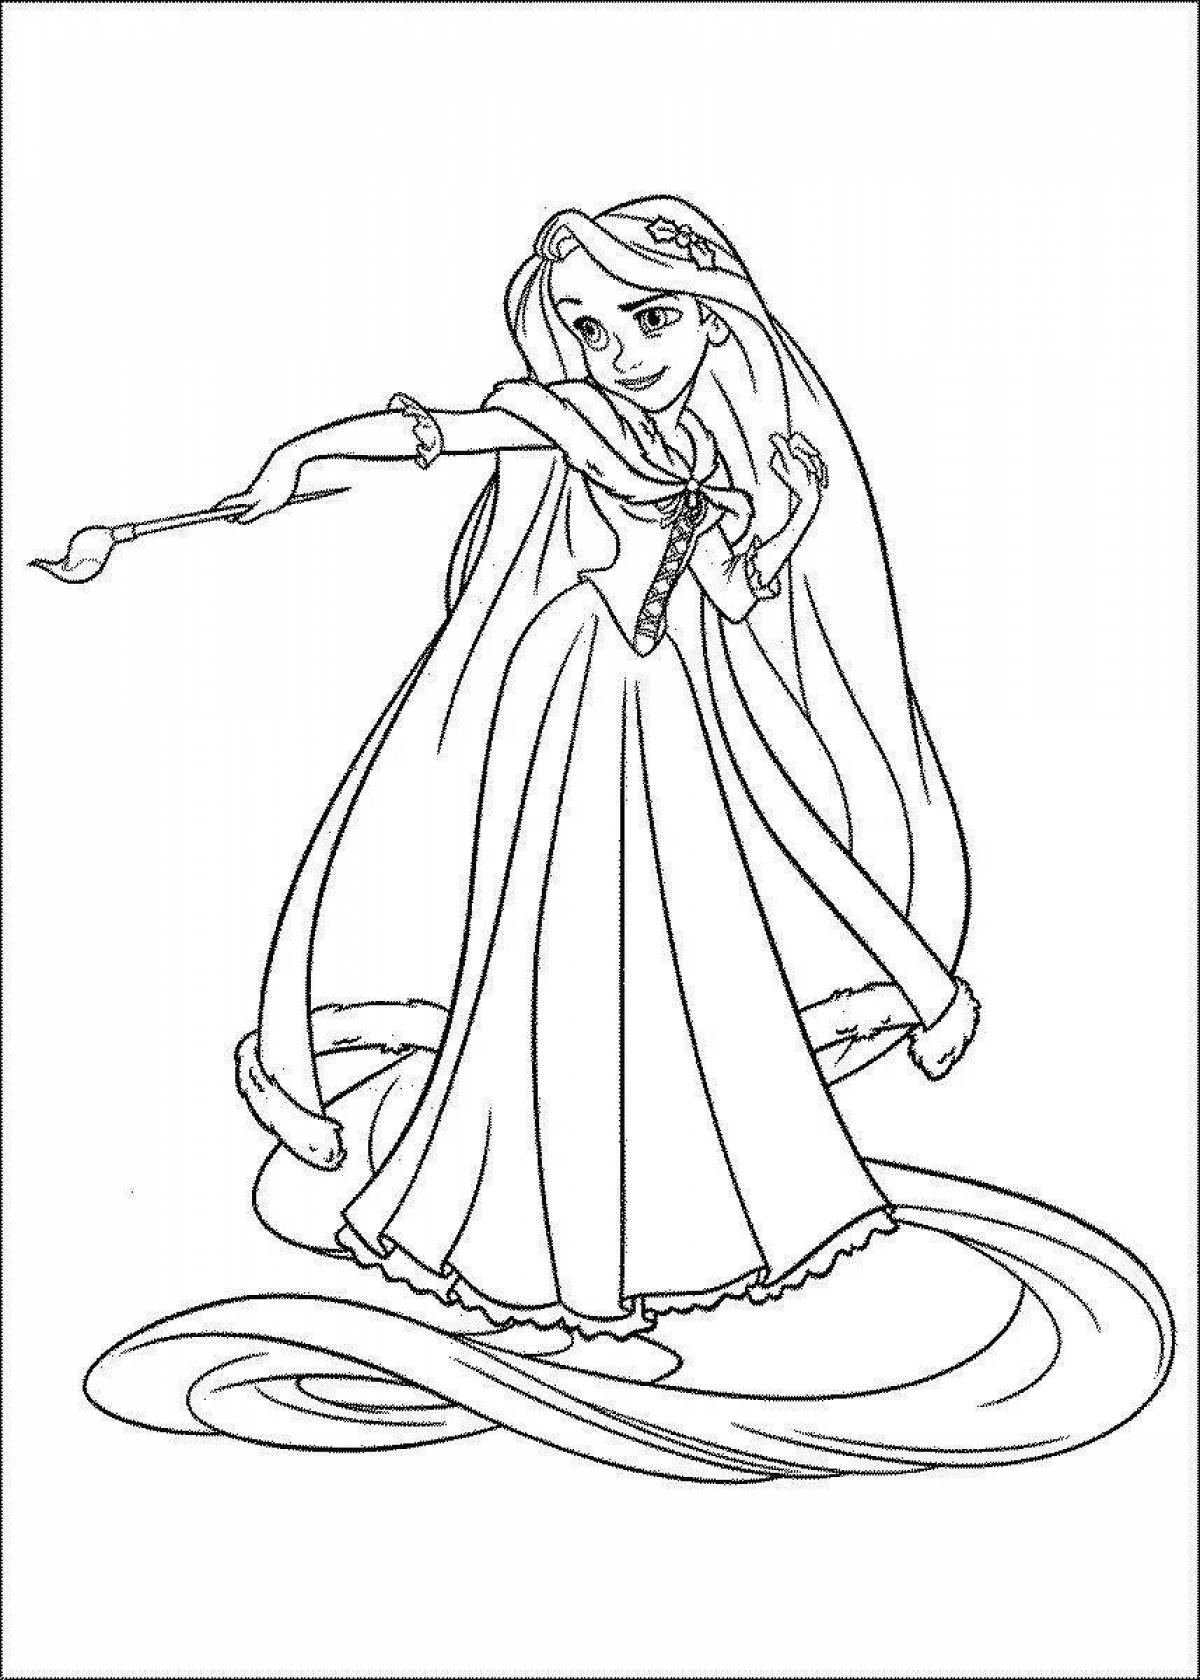 Coloring page charming rampoelsel